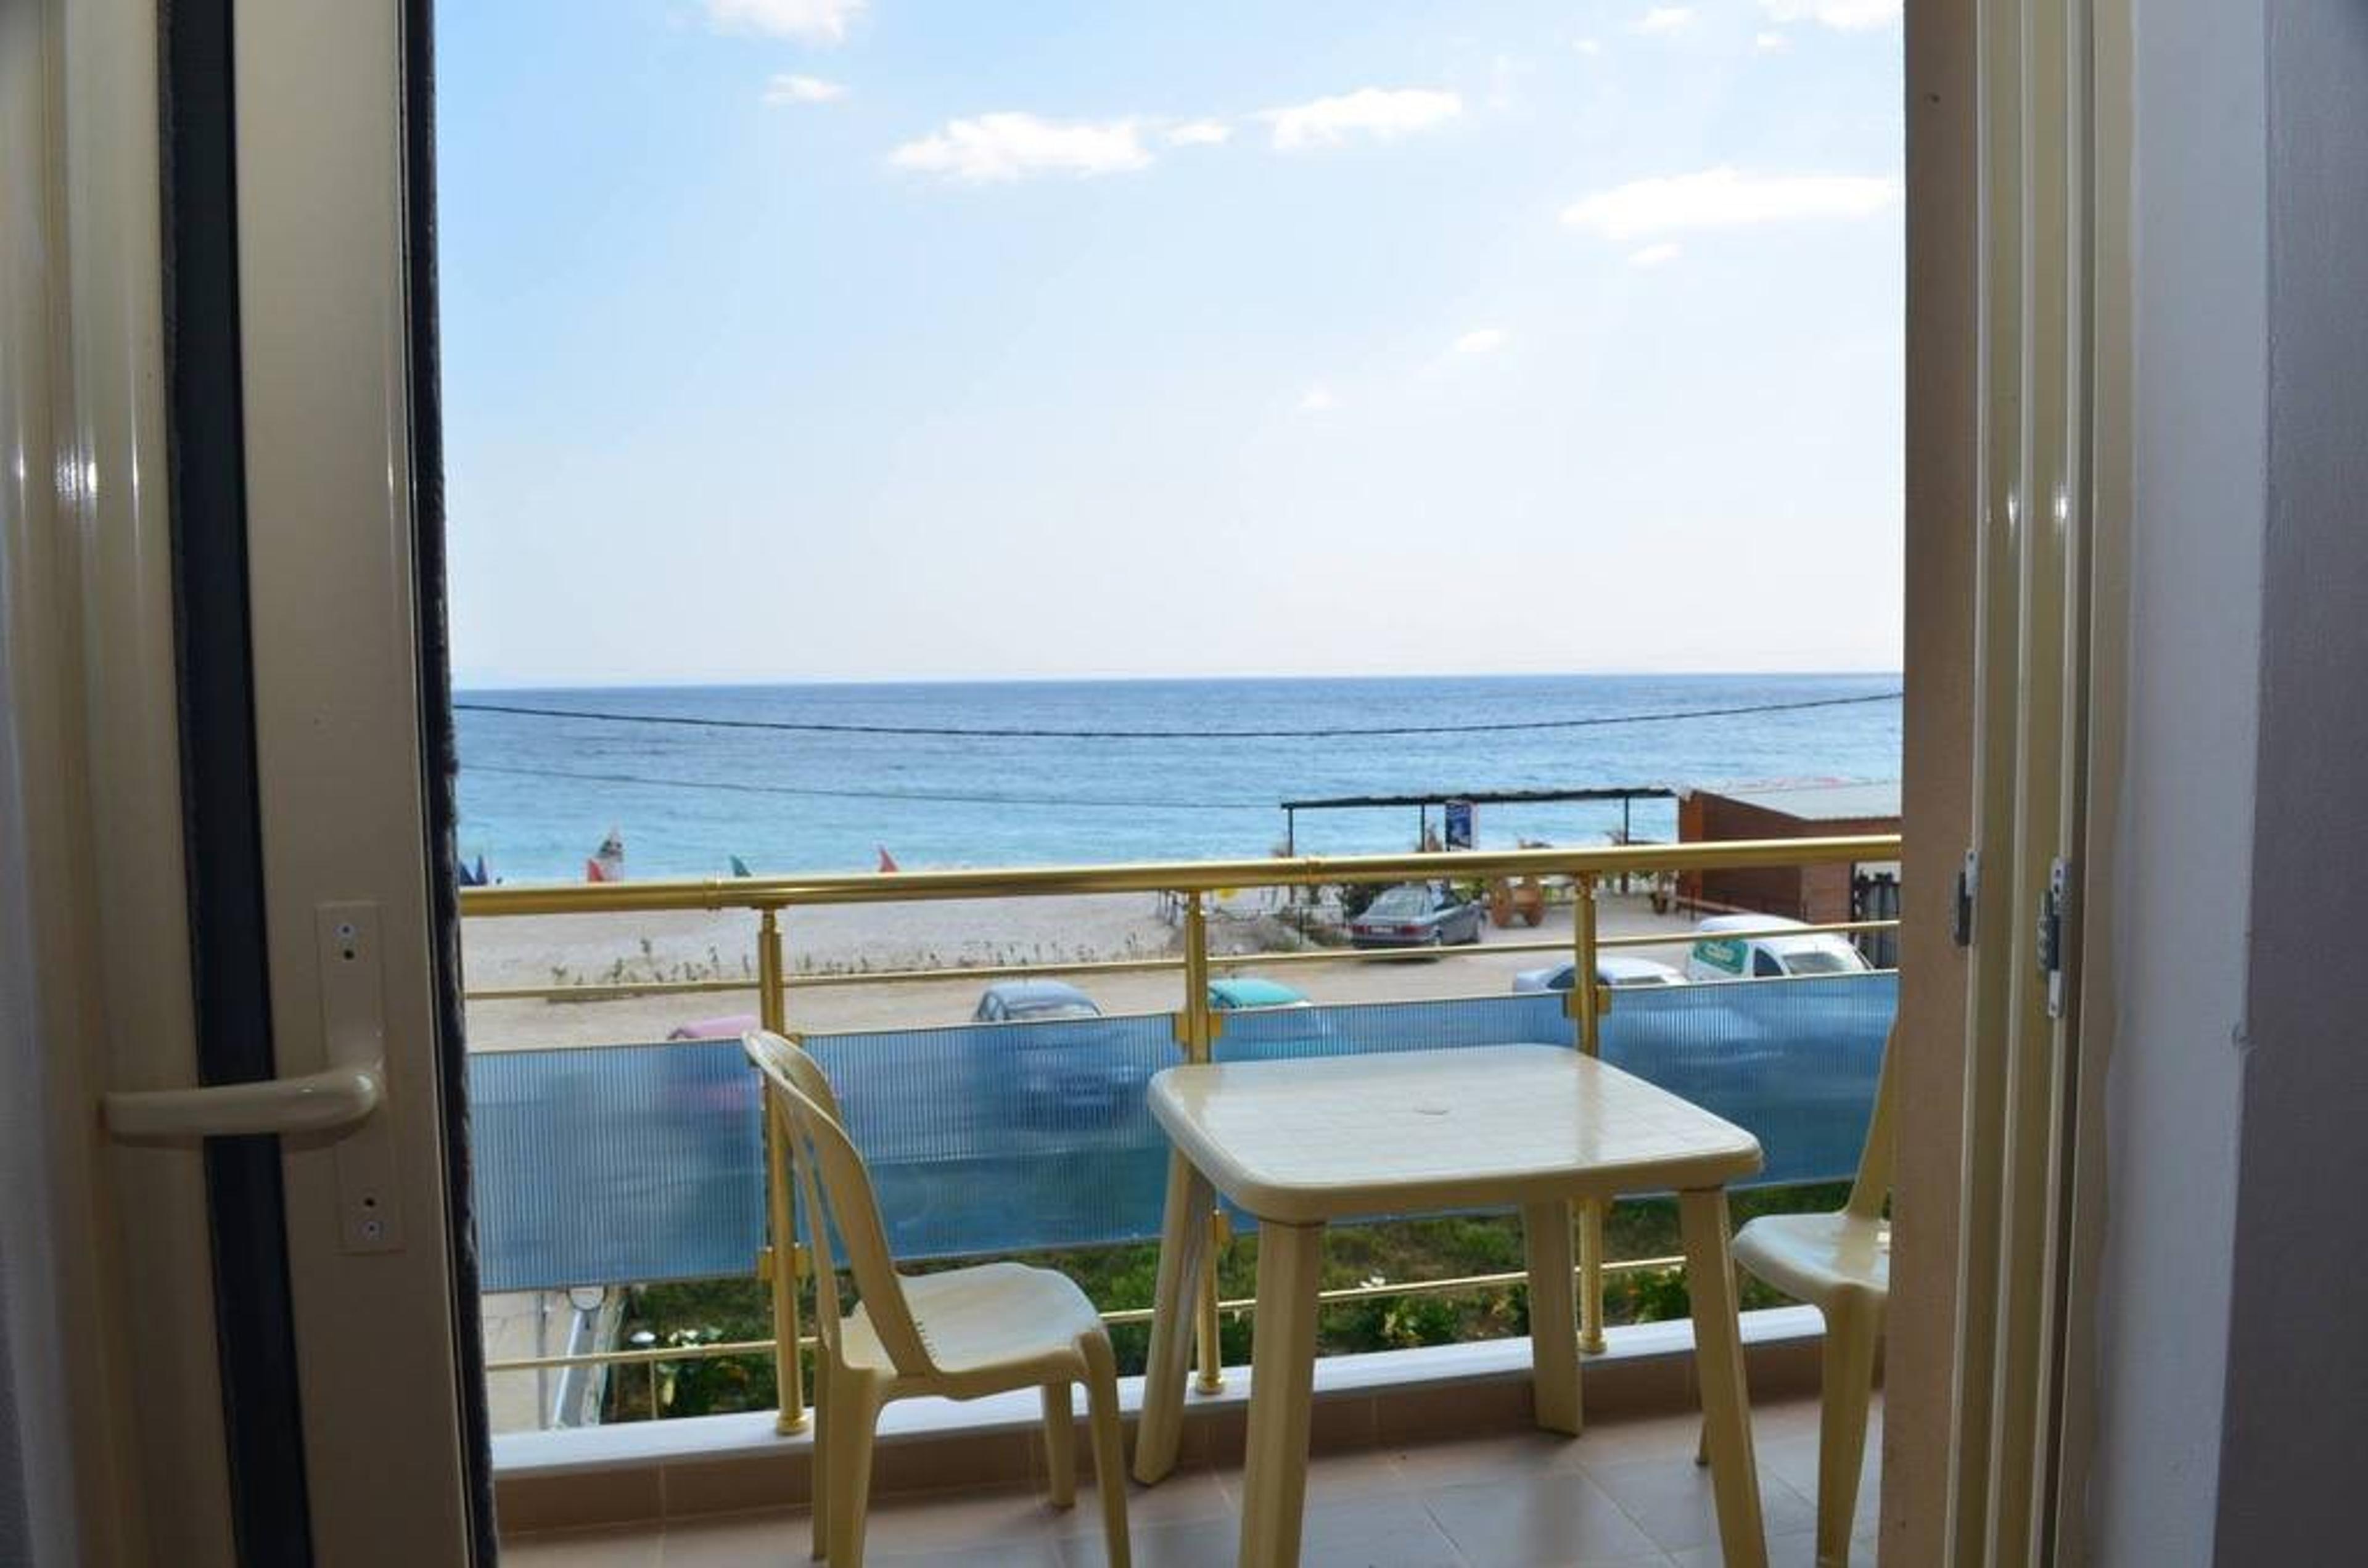 Balcony with seaview and table and chairs